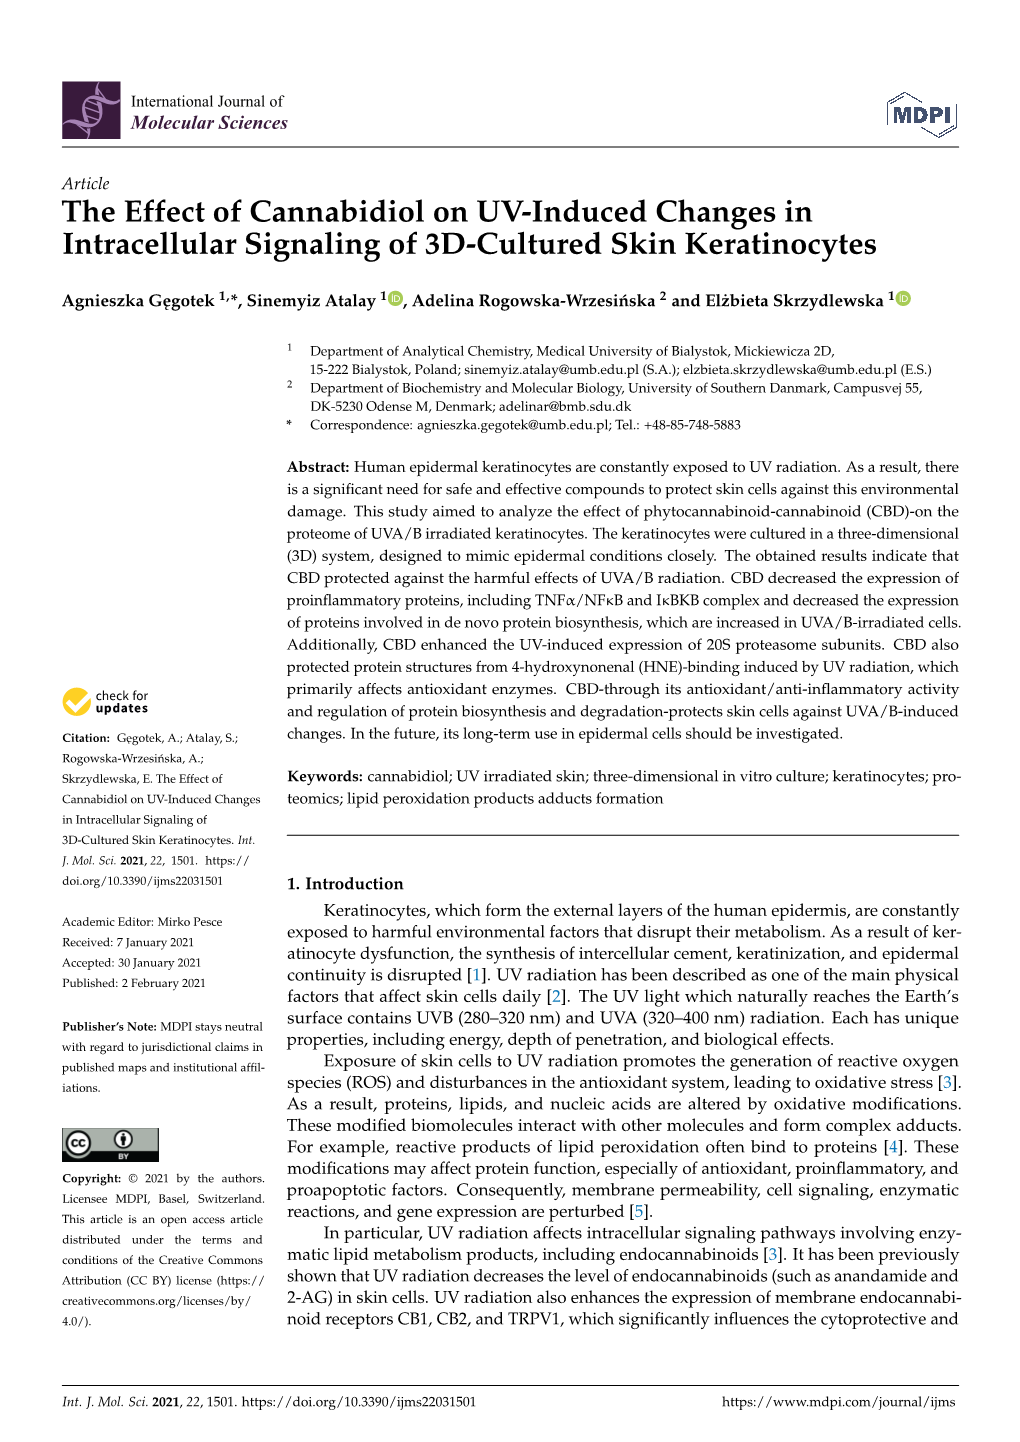 The Effect of Cannabidiol on UV-Induced Changes in Intracellular Signaling of 3D-Cultured Skin Keratinocytes